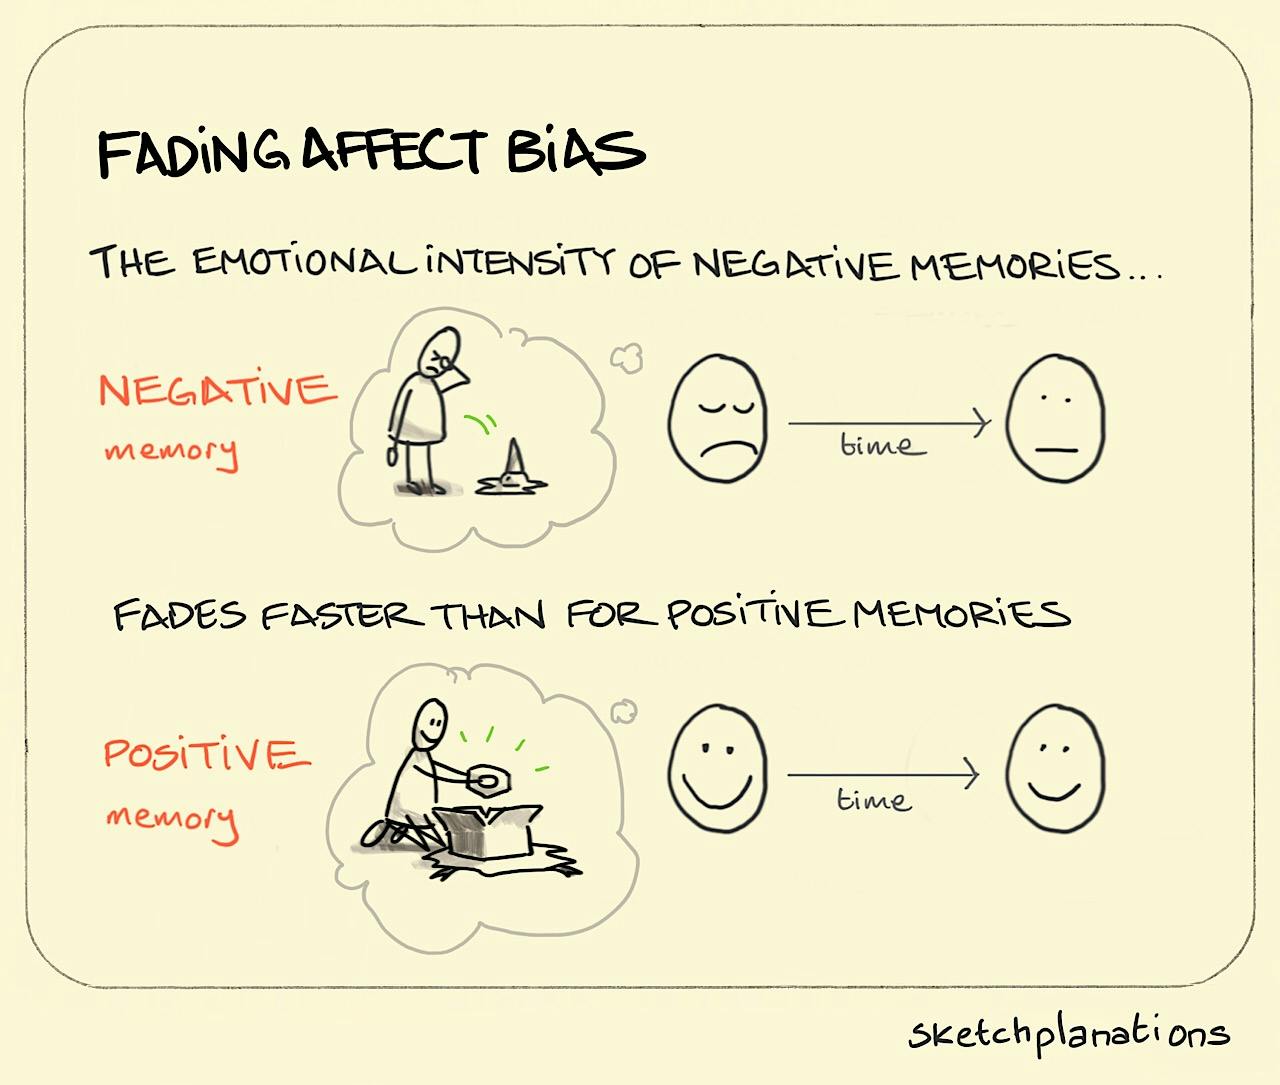 Fading affect bias - Sketchplanations